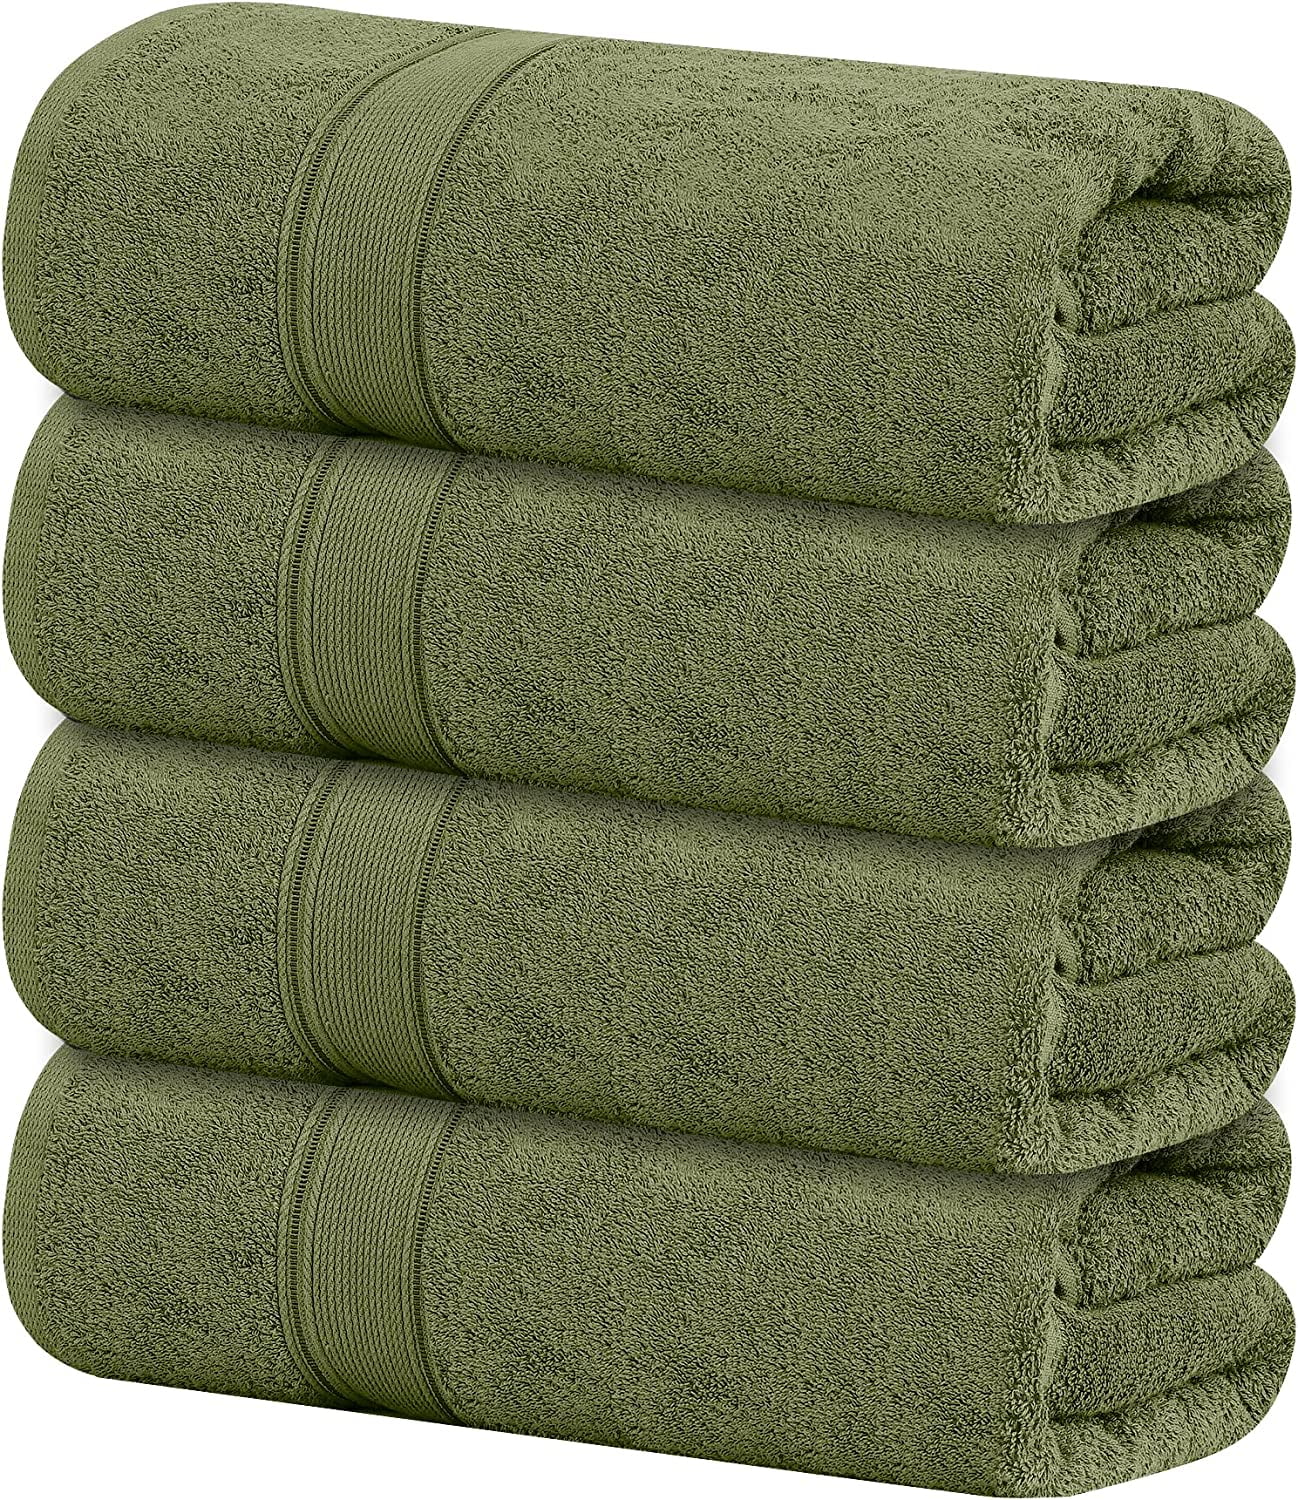 3 New With Tags Large 30”x56” Calvin Klein Plush Bath Towels Aloe Green